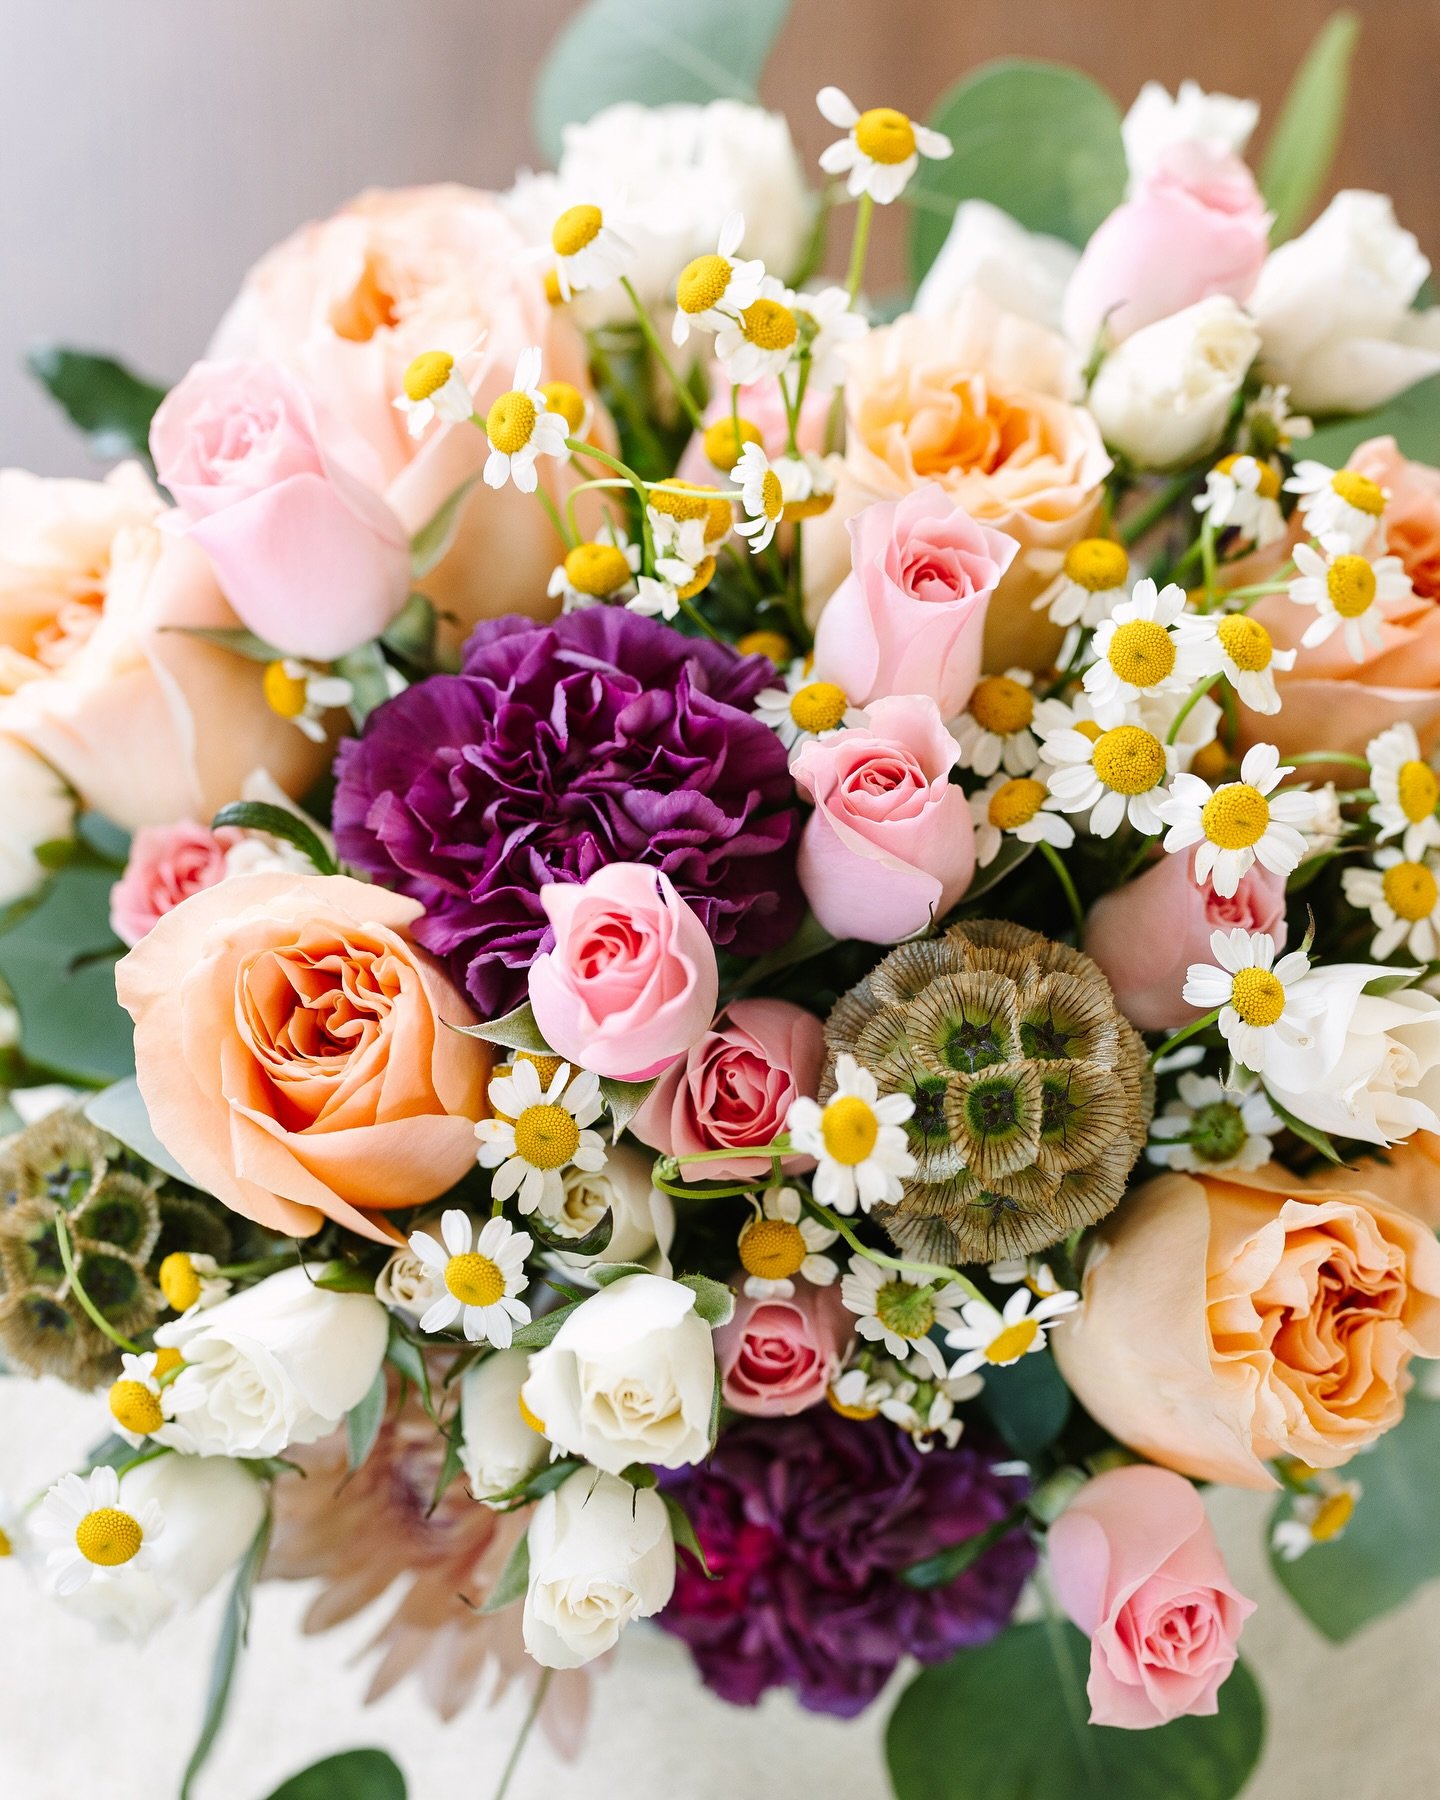 One of my favorite images showing the color &amp; texture of our Unconditional Bouquet.

#myfloralcompass, #gatherinbloom, #fcblooms
#freshflowers #amazonflowers #lifestyleflowers #lifestyleshoot #onlineflowers #floraldecor #styledflorals #MothersDay